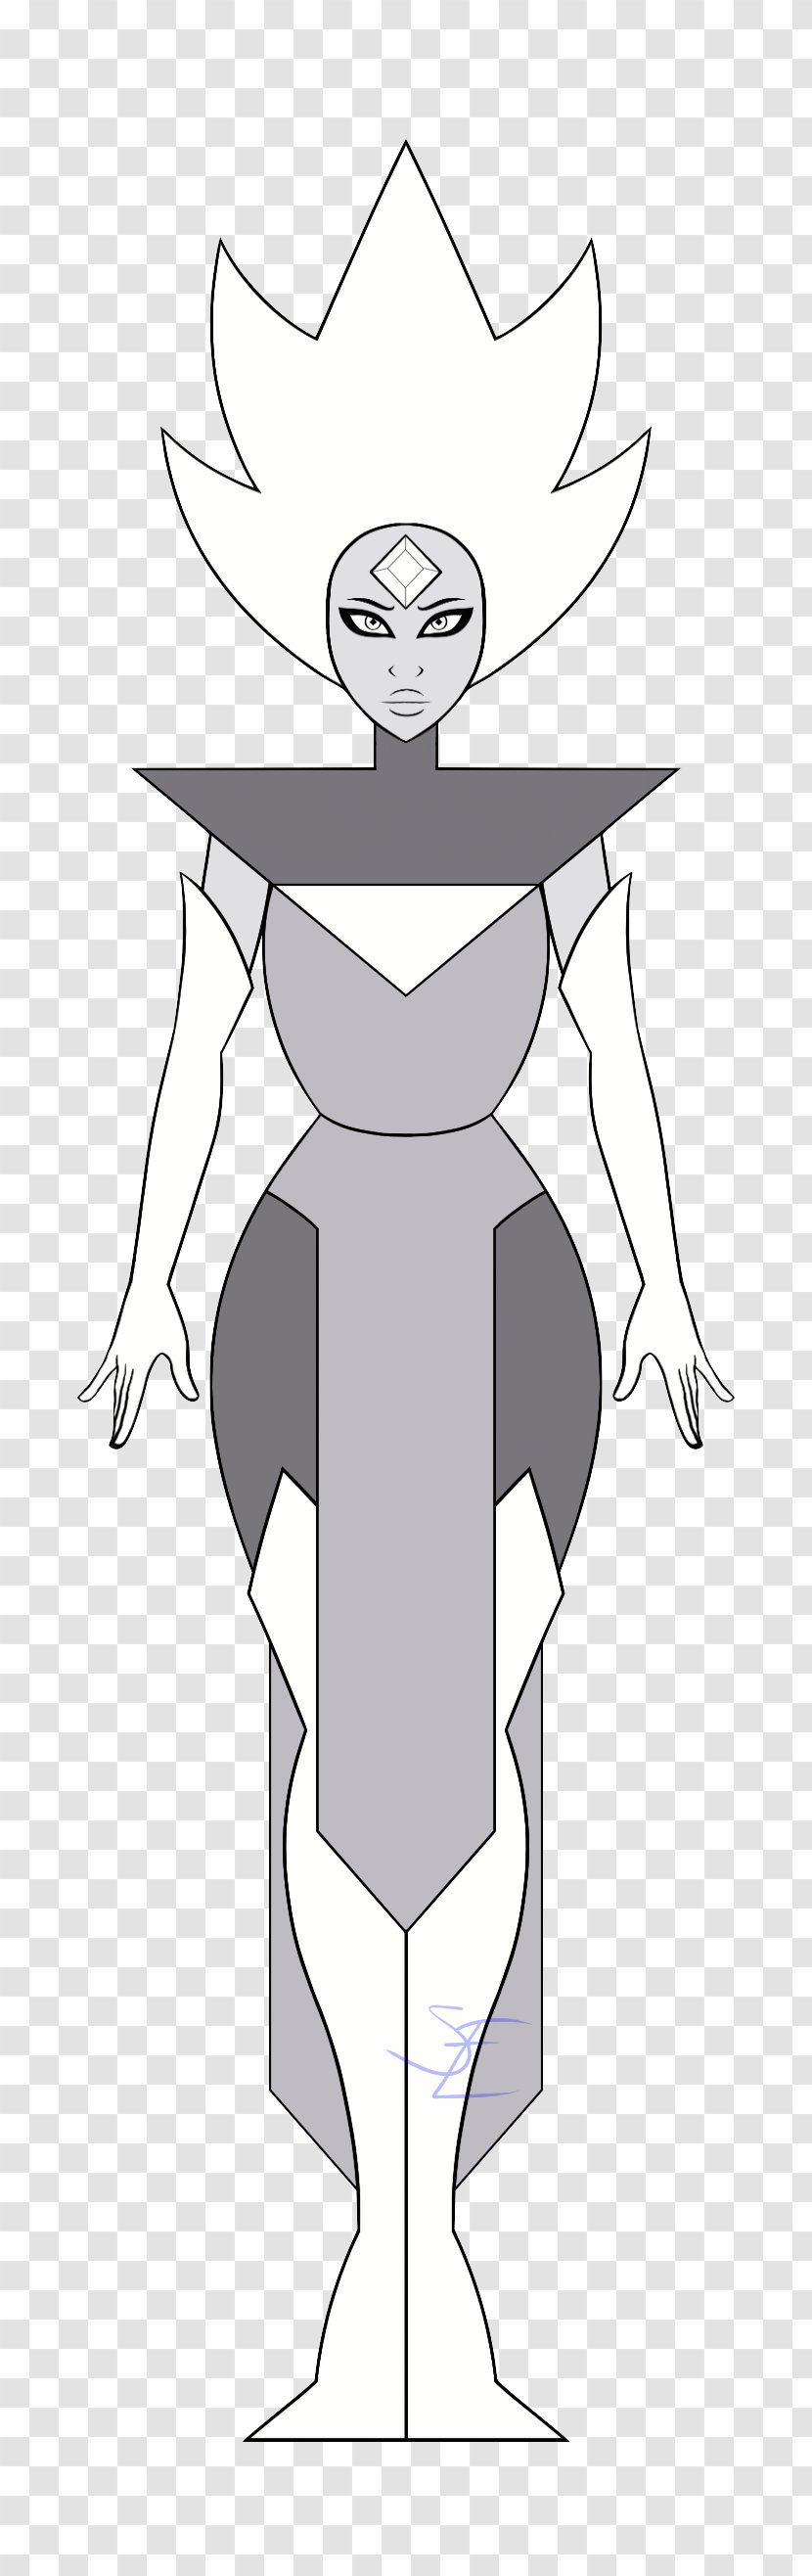 Drawing Line Art White Clip - Clothing - Sugar Transparent PNG